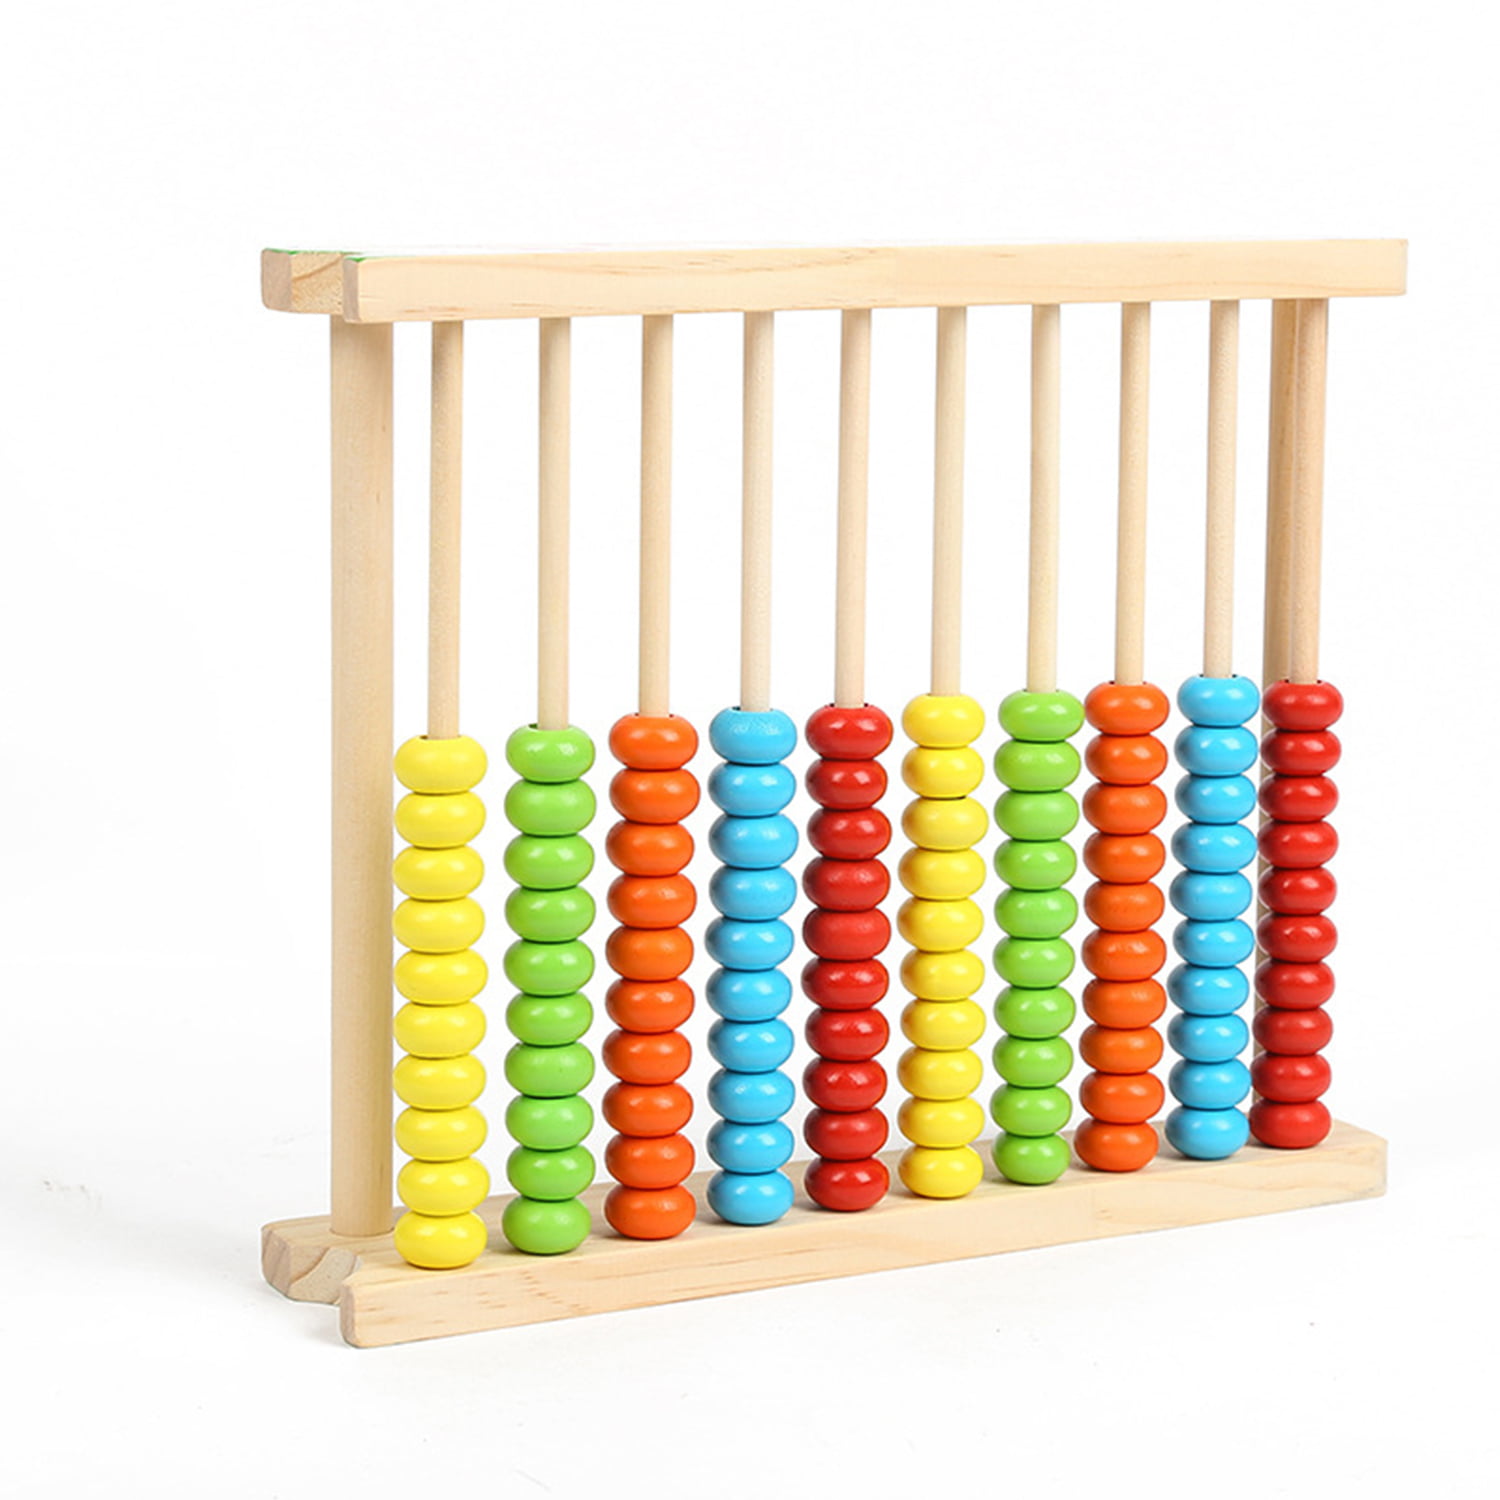 Wooden Abacus 100 Beads Counting Number Preschool Kids Learn Educational Toy US 